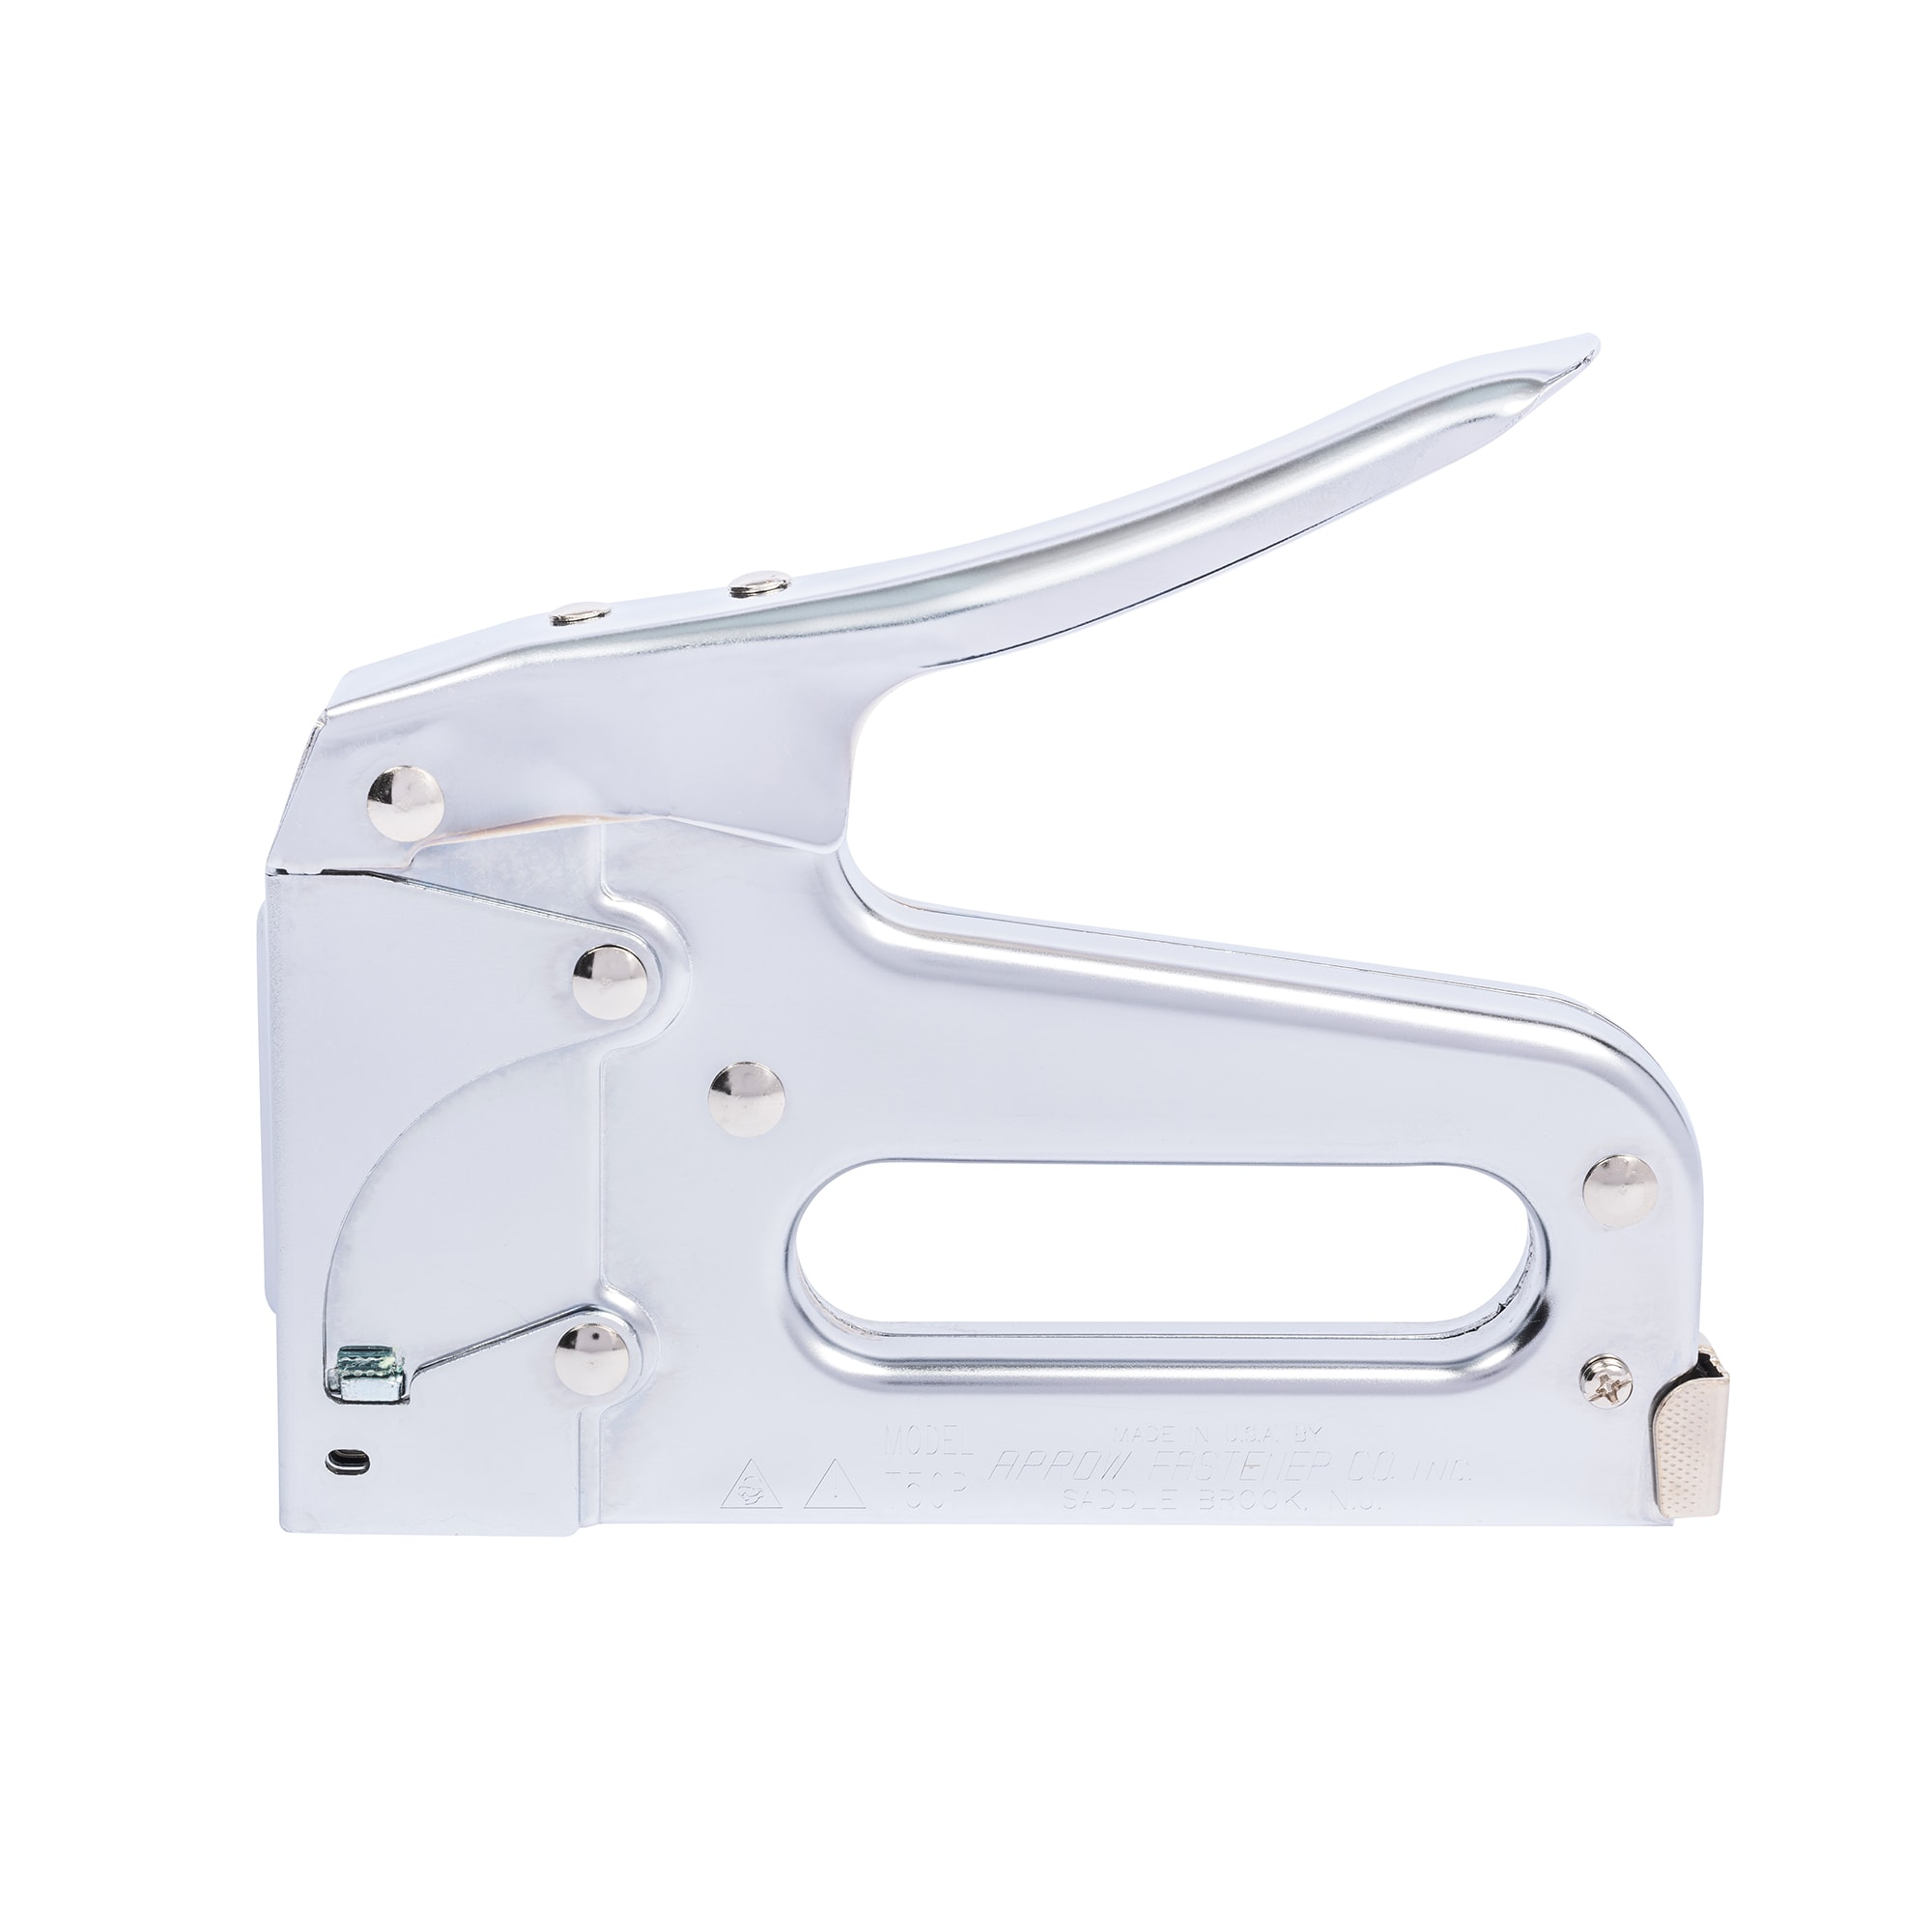 Best Staple Guns for All Your Patching Needs